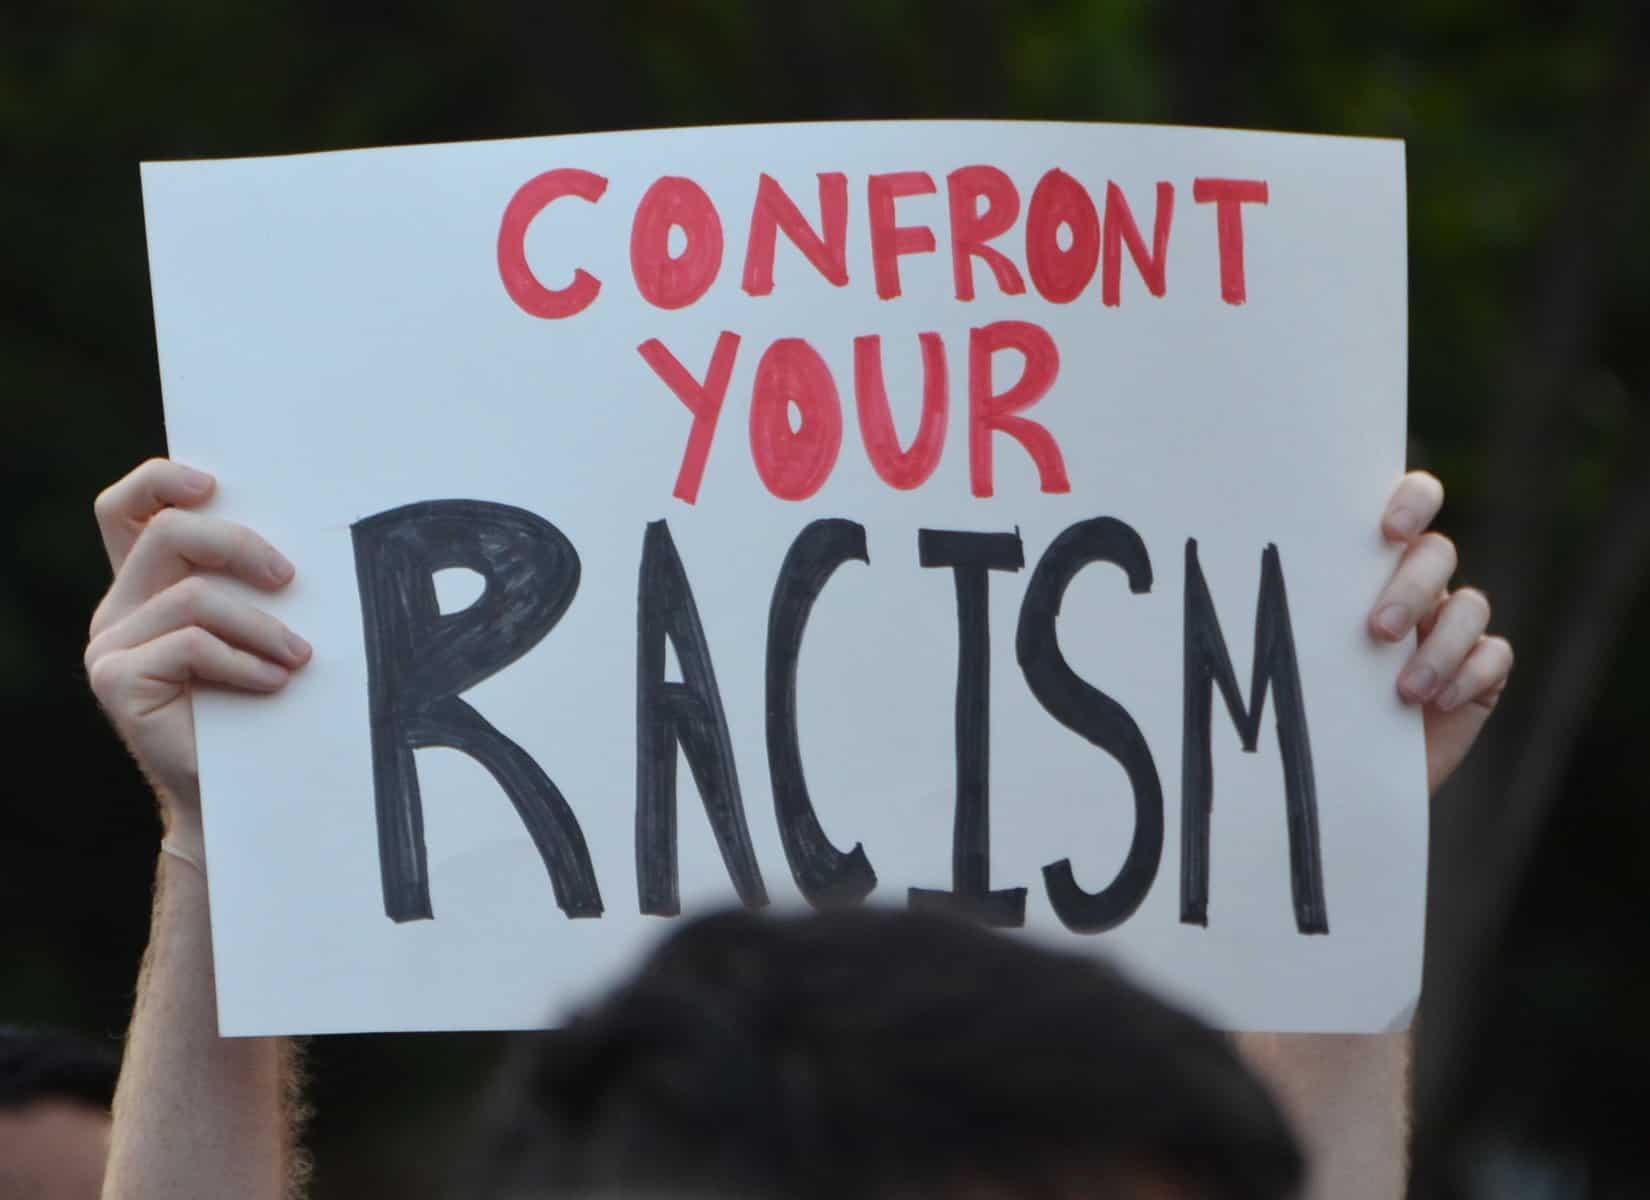 A person's hands are shown holding a white sign up with the words "Confront your racism" written on it.